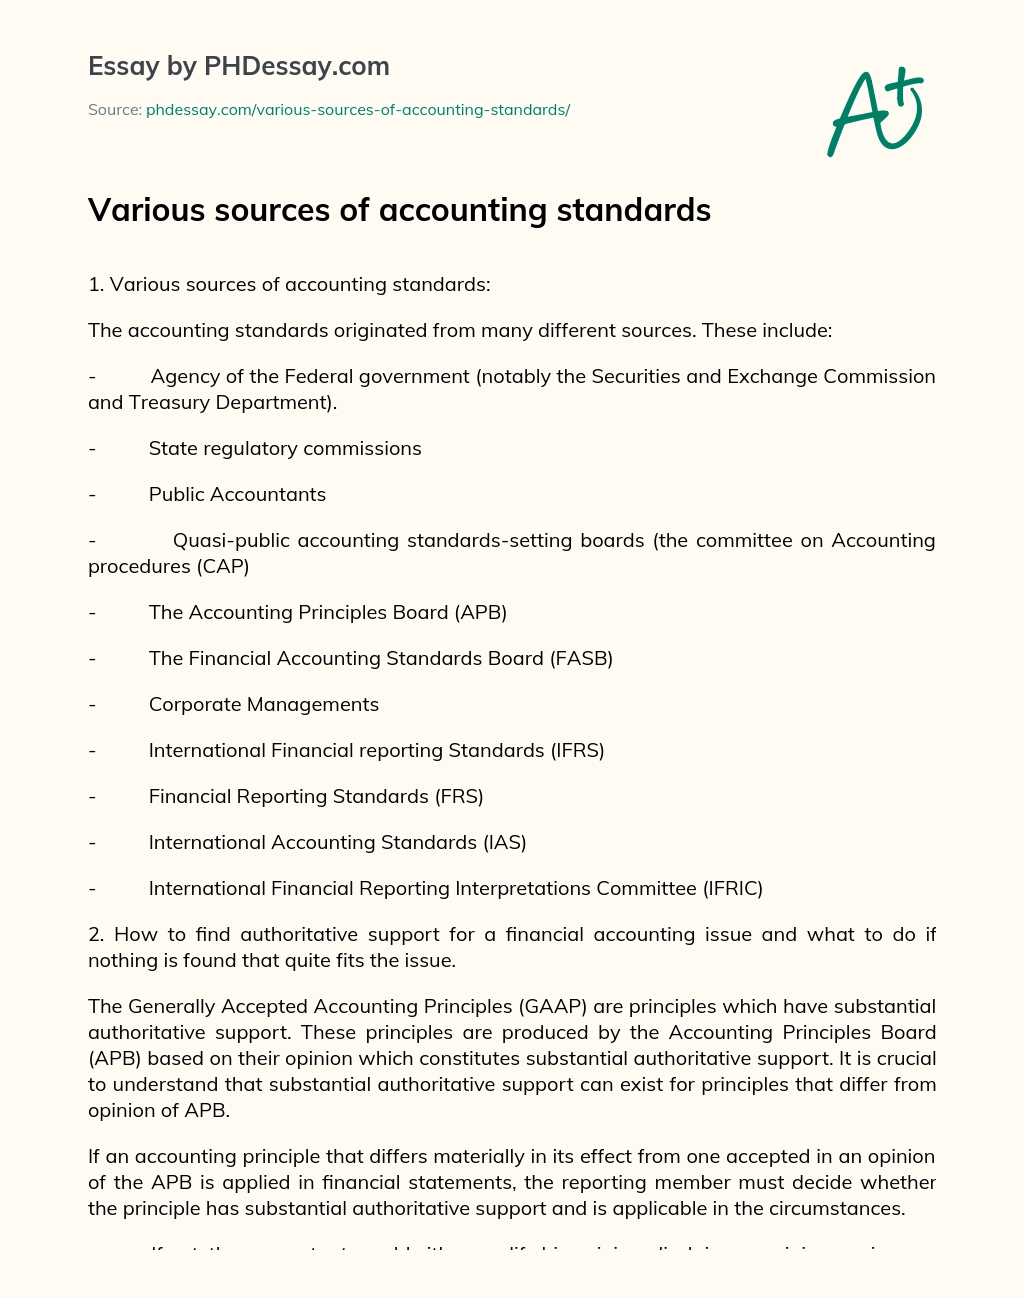 an essay about accounting standards